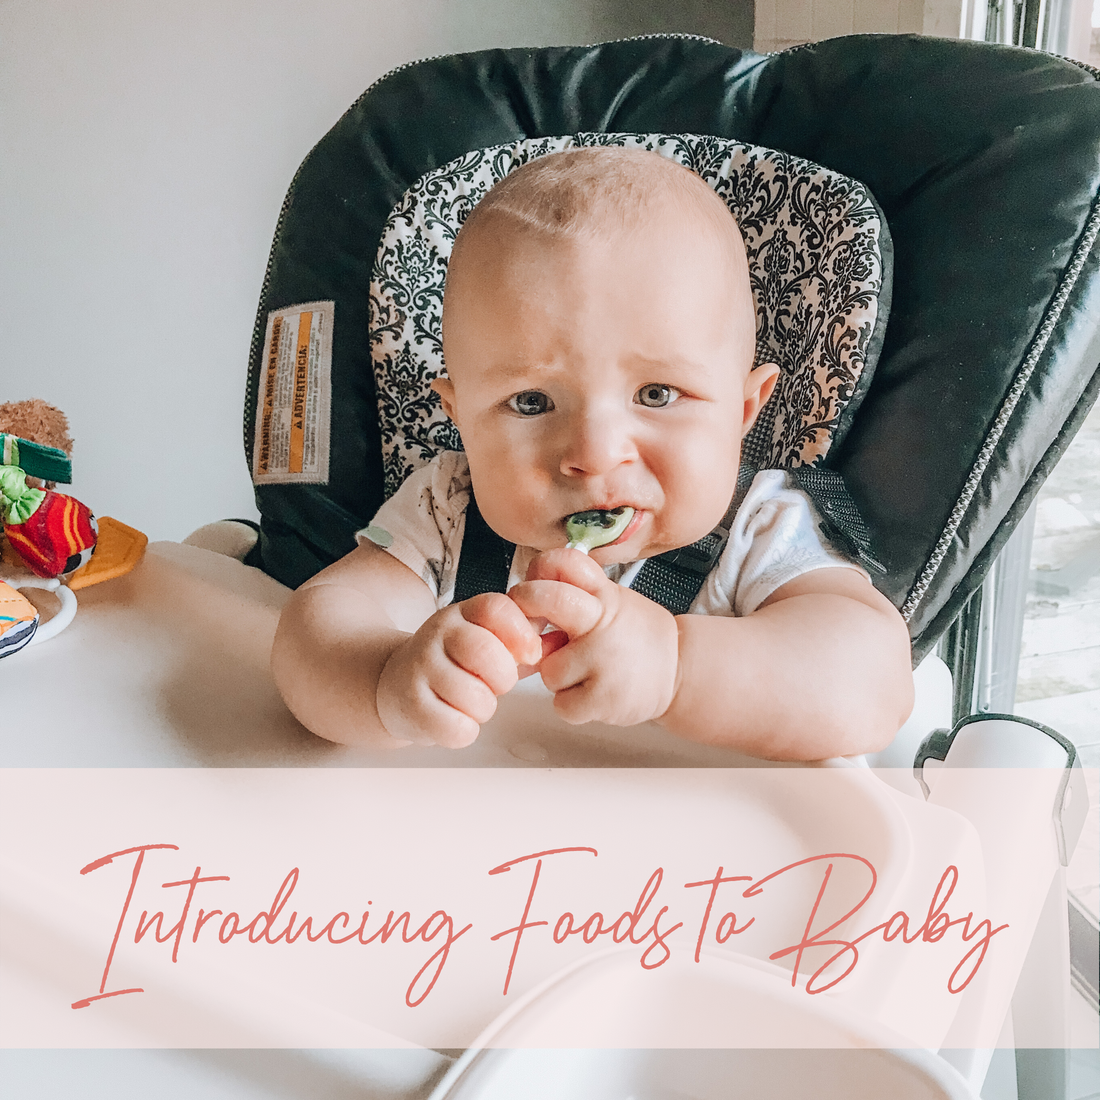 When Should You Introduce Food to Your Baby and How?